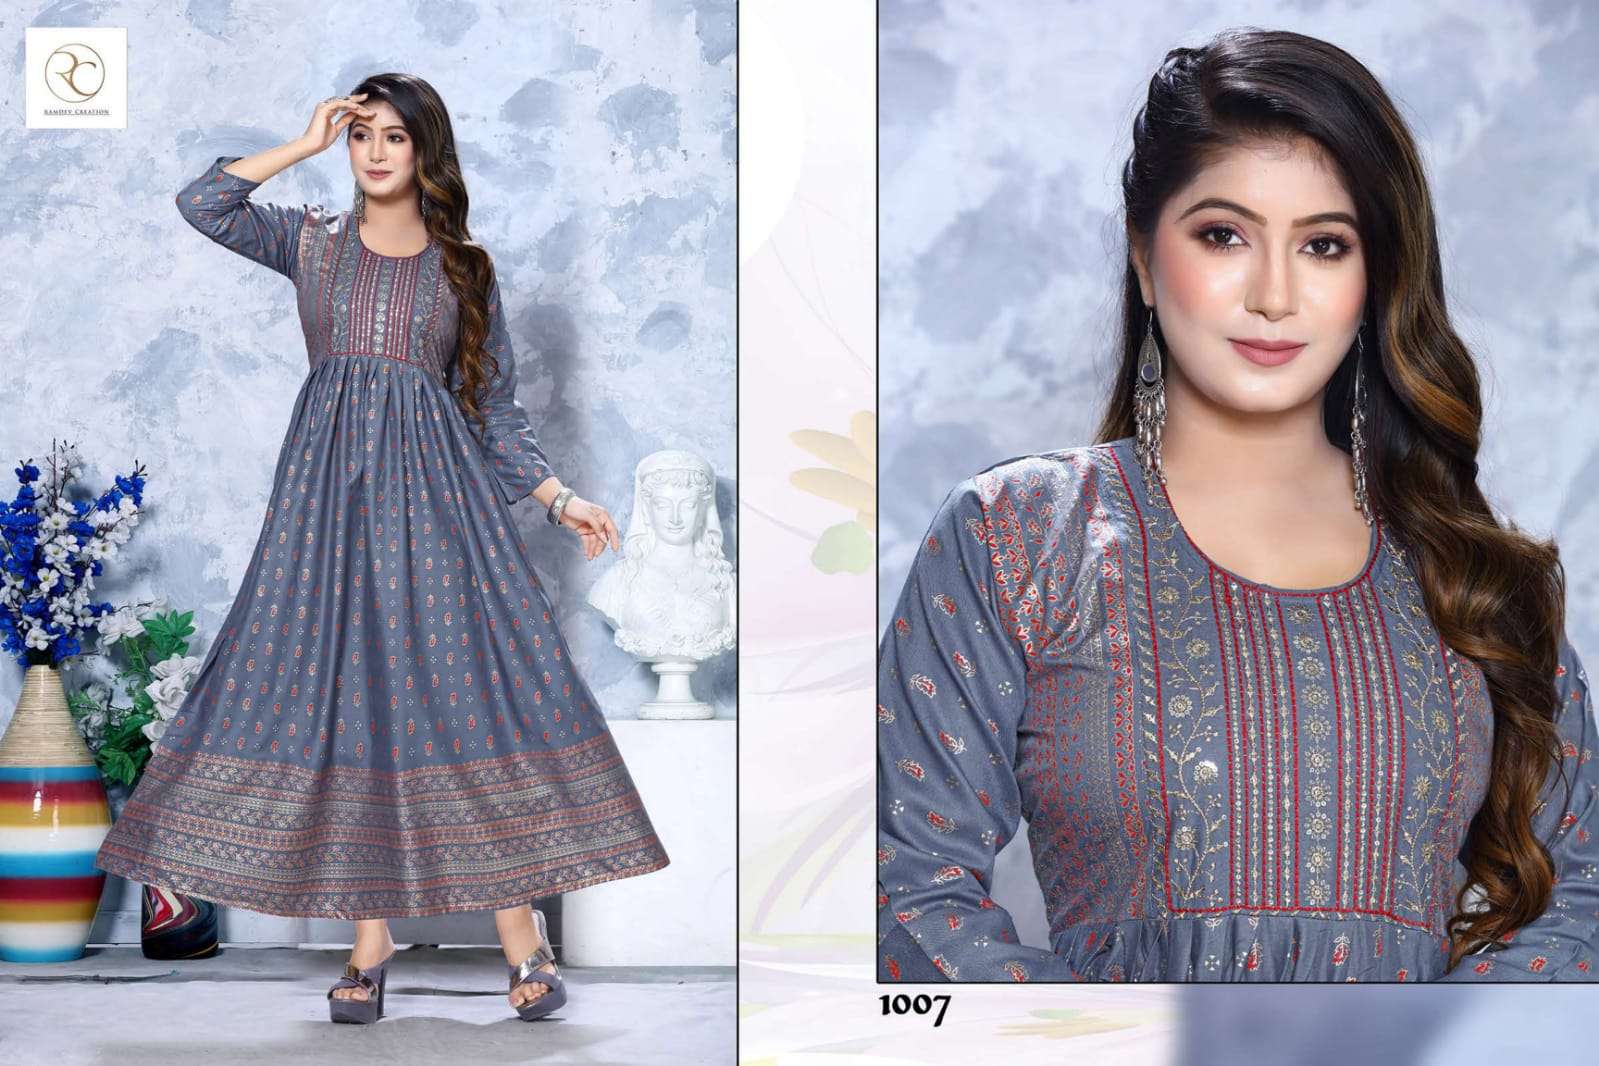 Manchali Vol-5 By Rc 1001 To 1008 Series Beautiful Stylish Fancy Colorful Casual Wear & Ethnic Wear Rayon Print Gowns At Wholesale Price